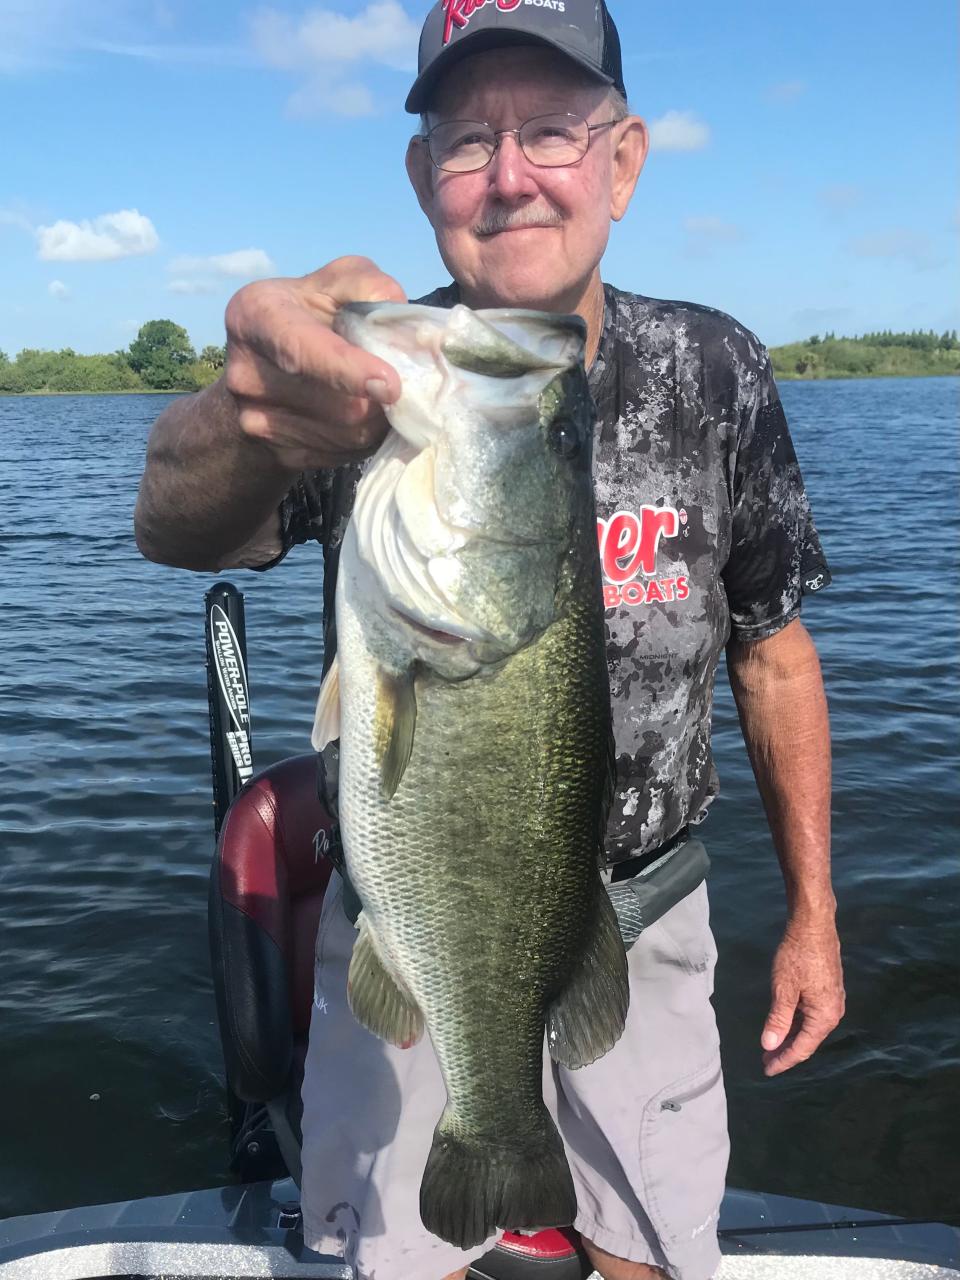 Danny Hamm caught this 8-pound bass recently on a junebug worm in the pits near Mulberry. This was the biggest fish out of a hauling of 40, with 20 being more than 3 pounds, as well as a 6- and 7- pounder.